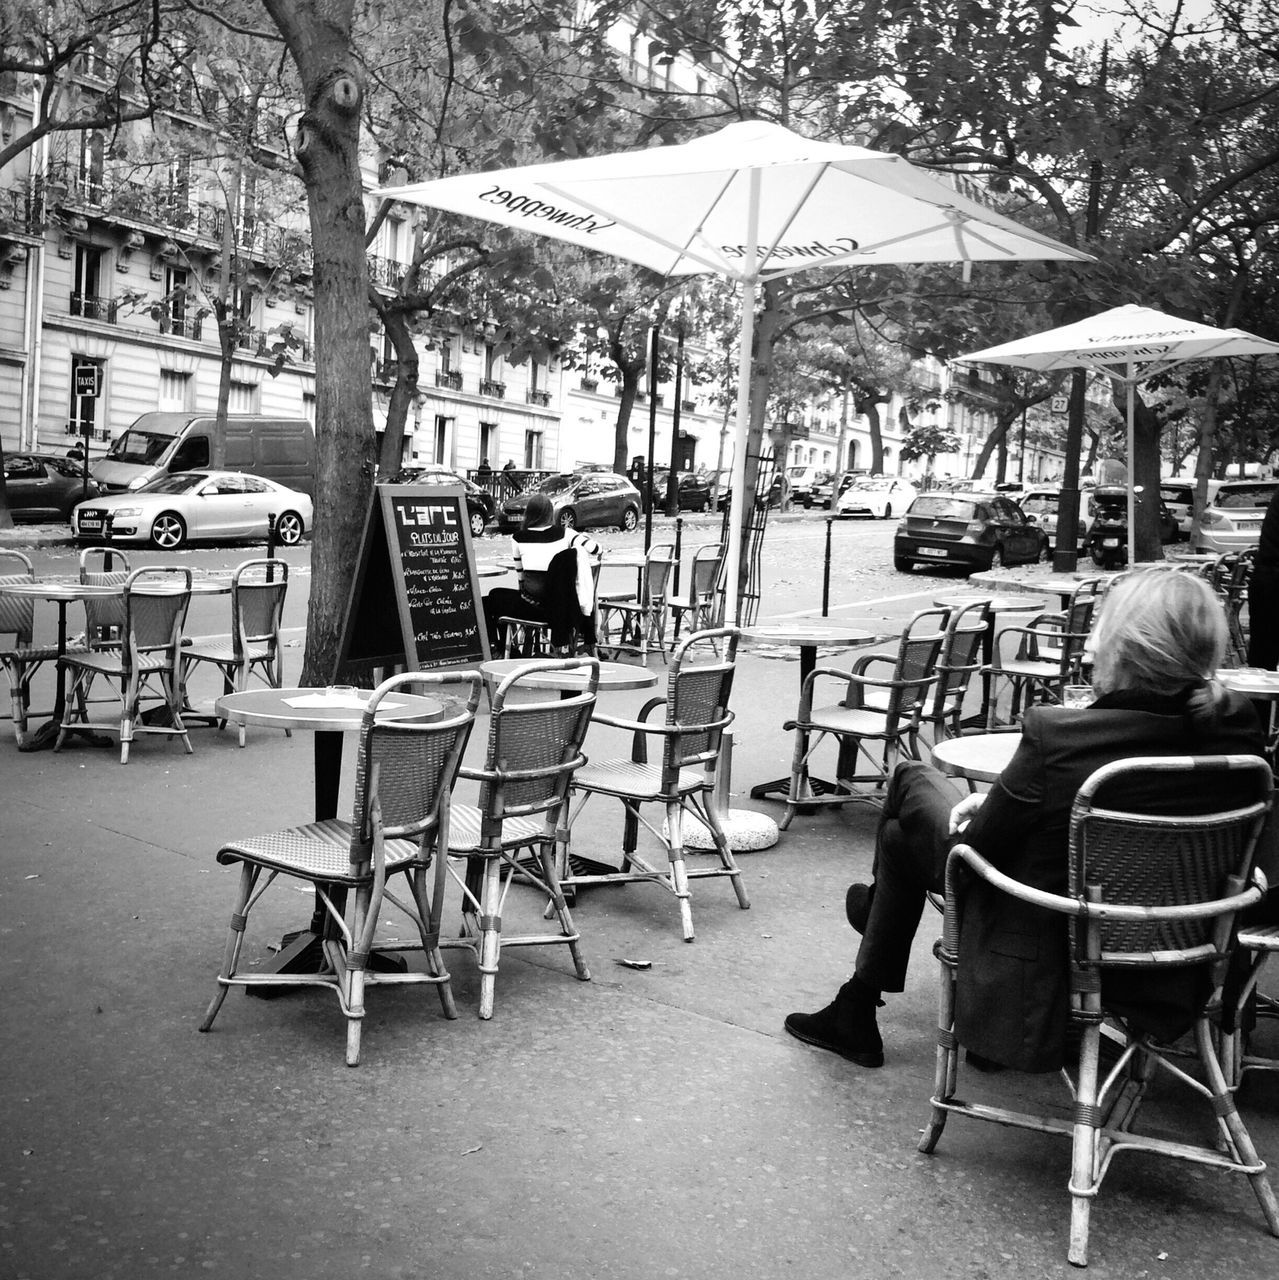 chair, table, bench, empty, sidewalk cafe, tree, relaxation, absence, sitting, seat, restaurant, lifestyles, day, leisure activity, cafe, outdoors, built structure, childhood